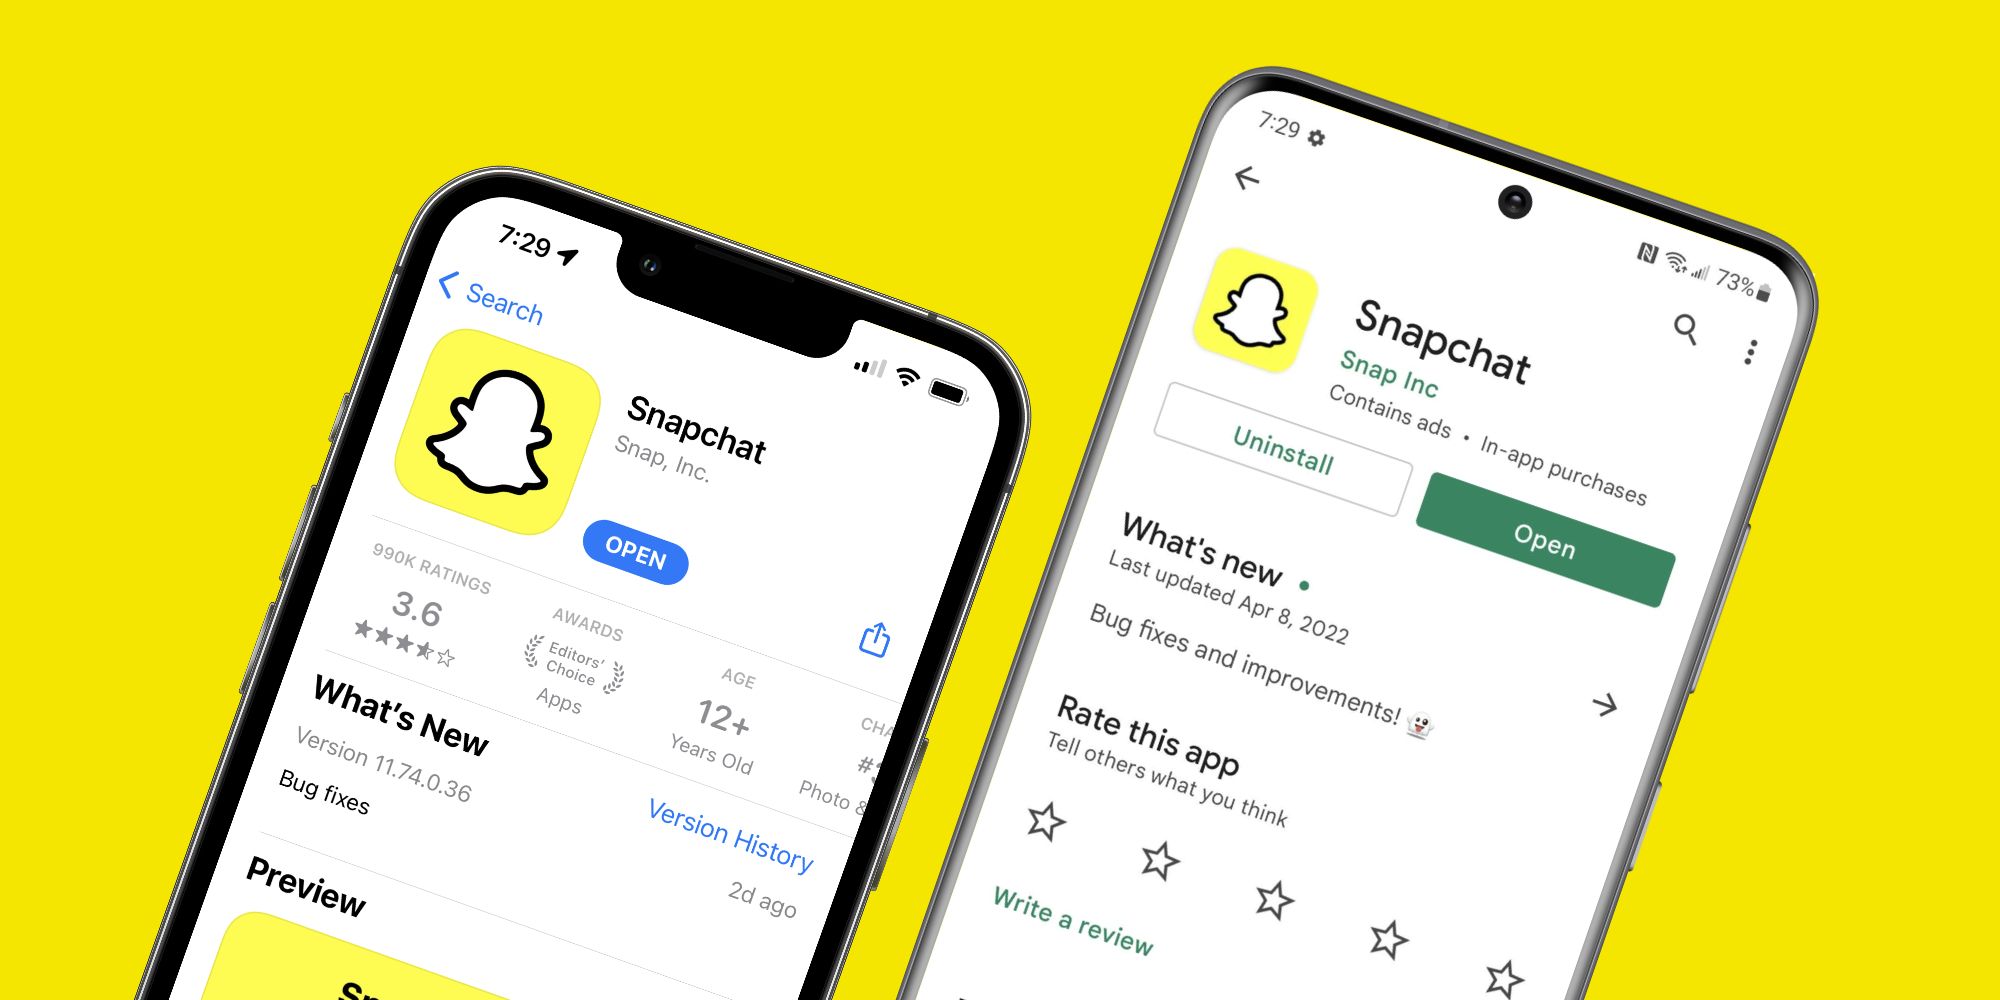 Snapchat app on an iPhone and Android device